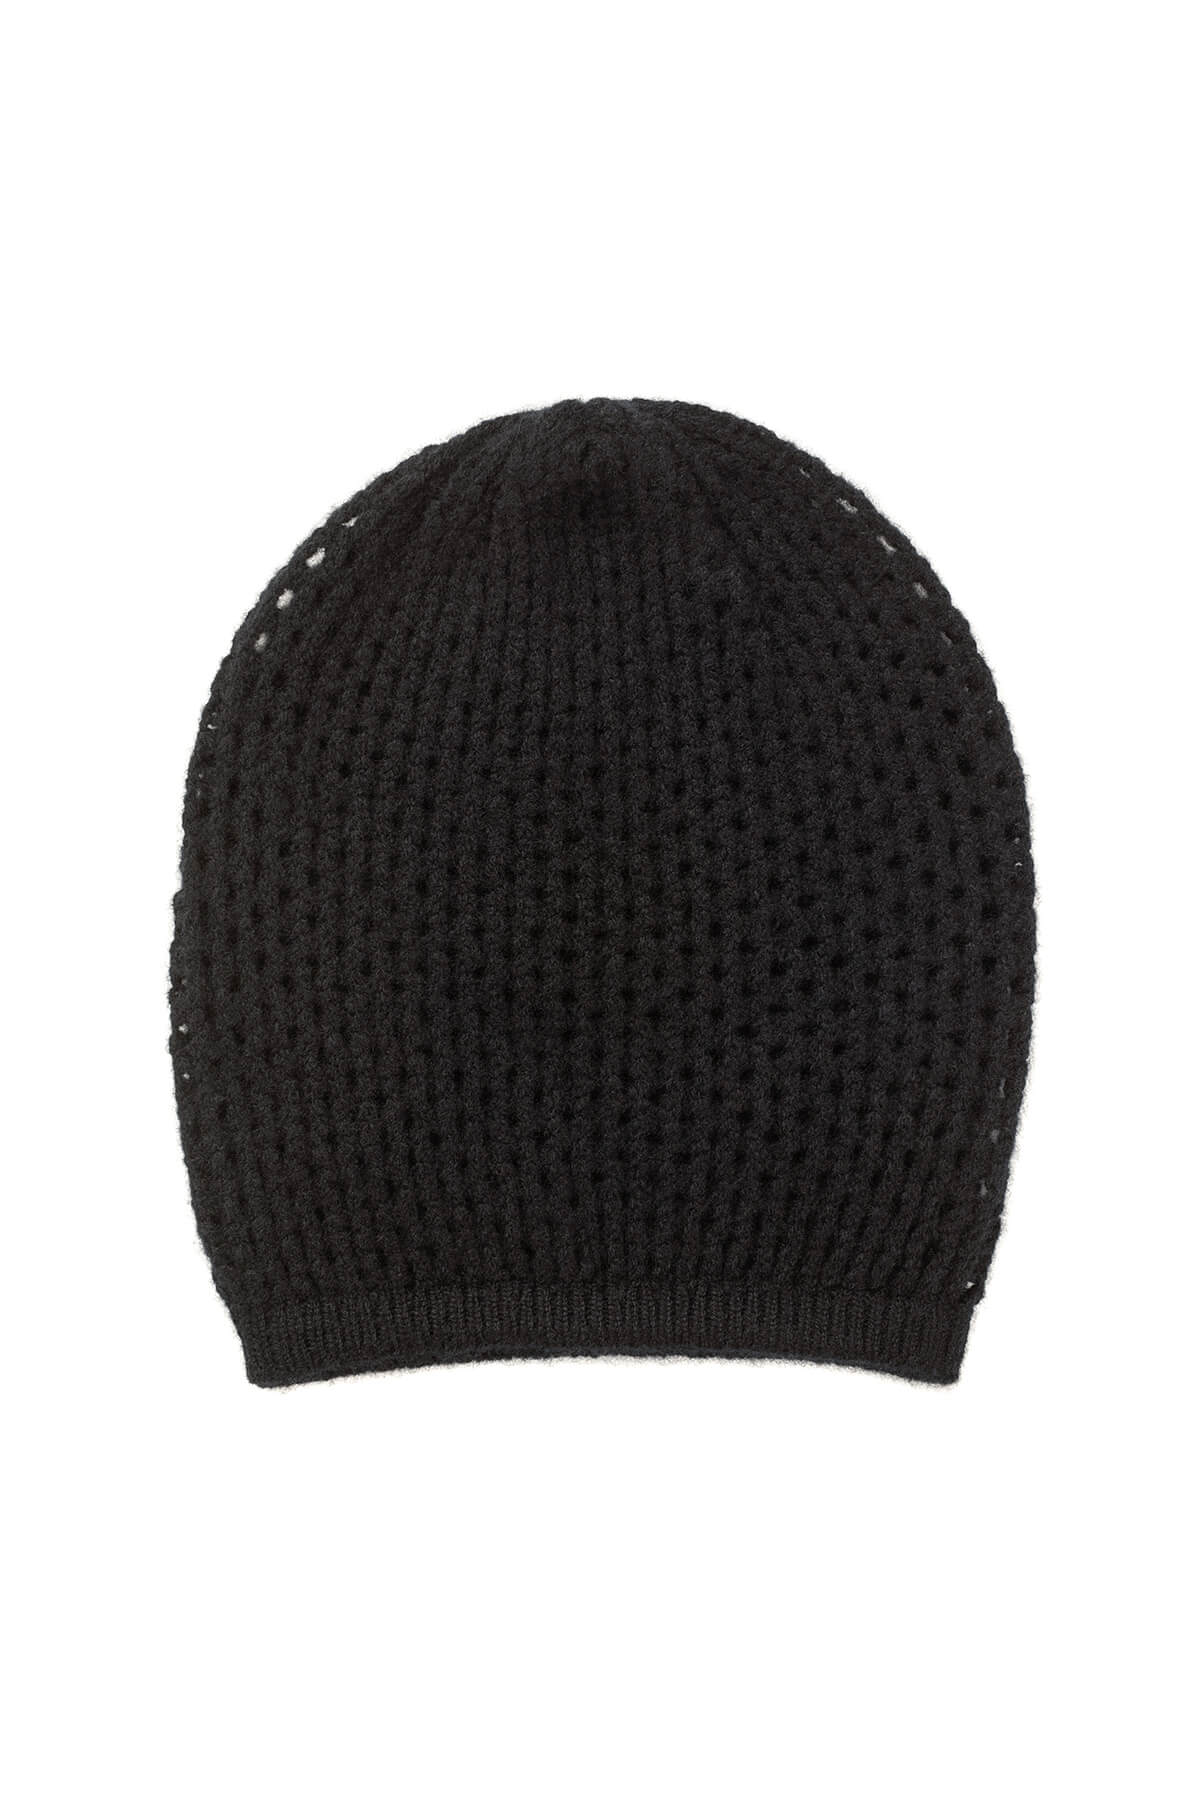 Johnstons of Elgin’s Black Cashmere Crochet Beanie on a white background HAY03301SA0900